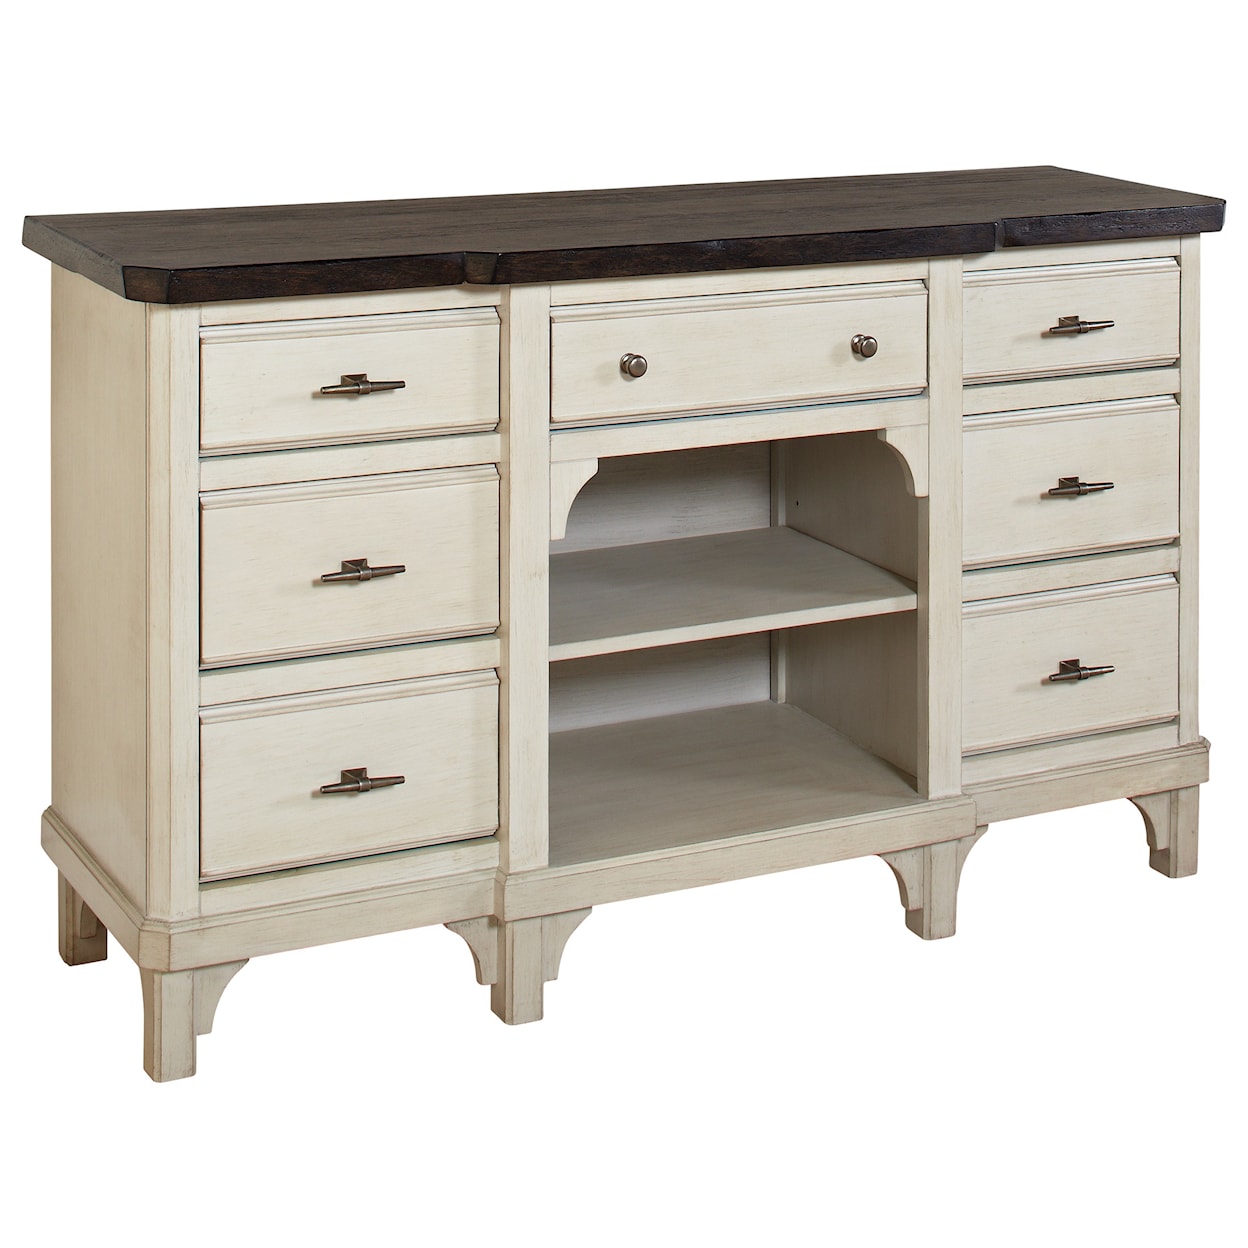 Avalon Furniture Mystic Cay 7 Drawer Sideboard